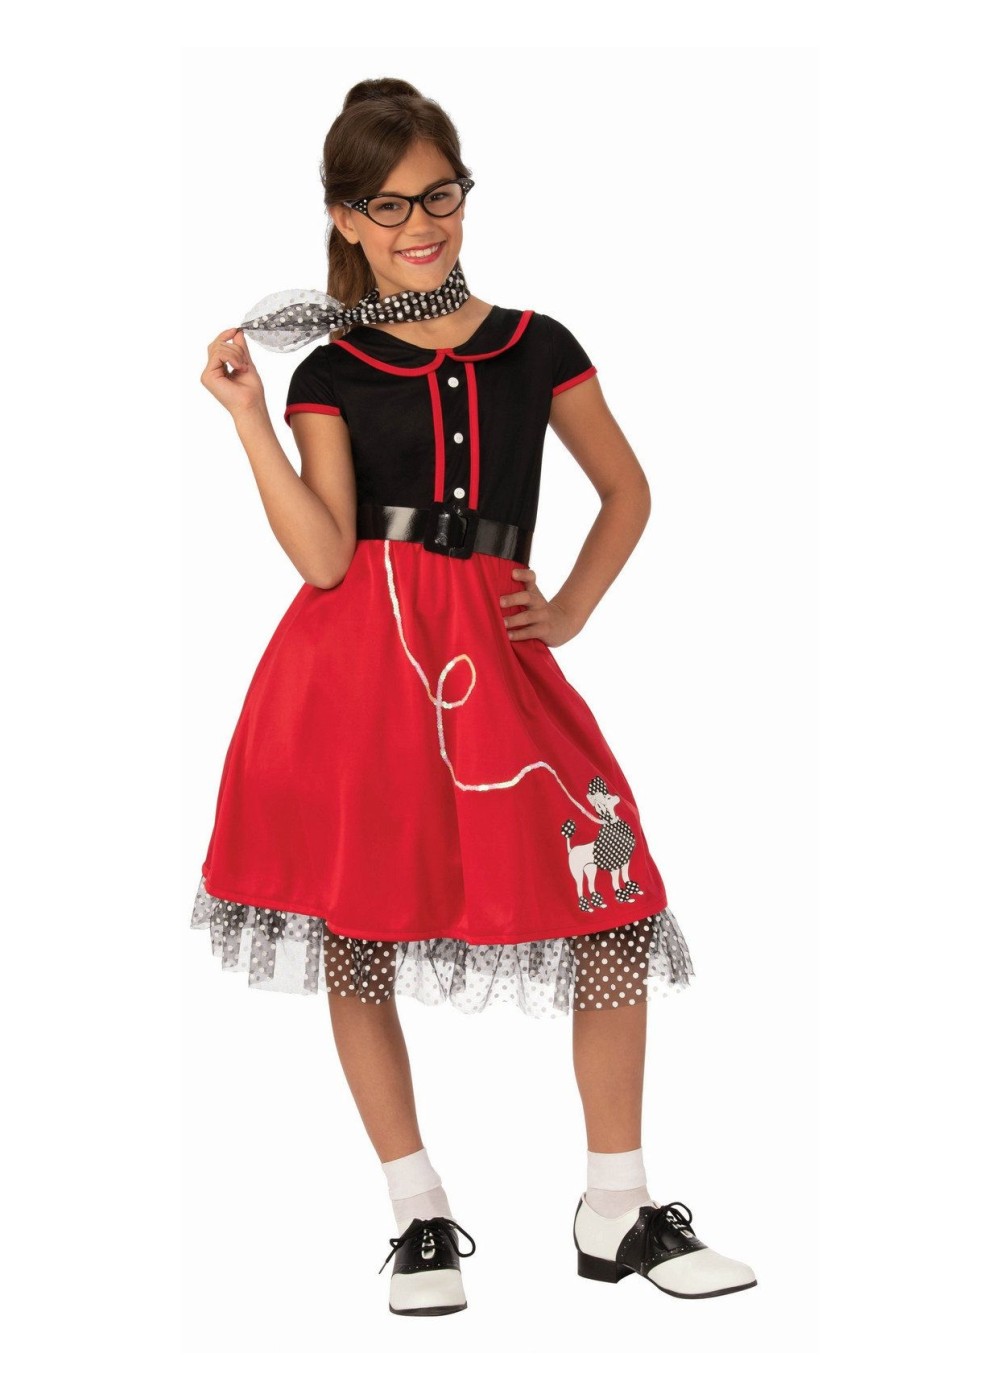 Kids Girls Red Poodle Skirt Sweetheart Costume